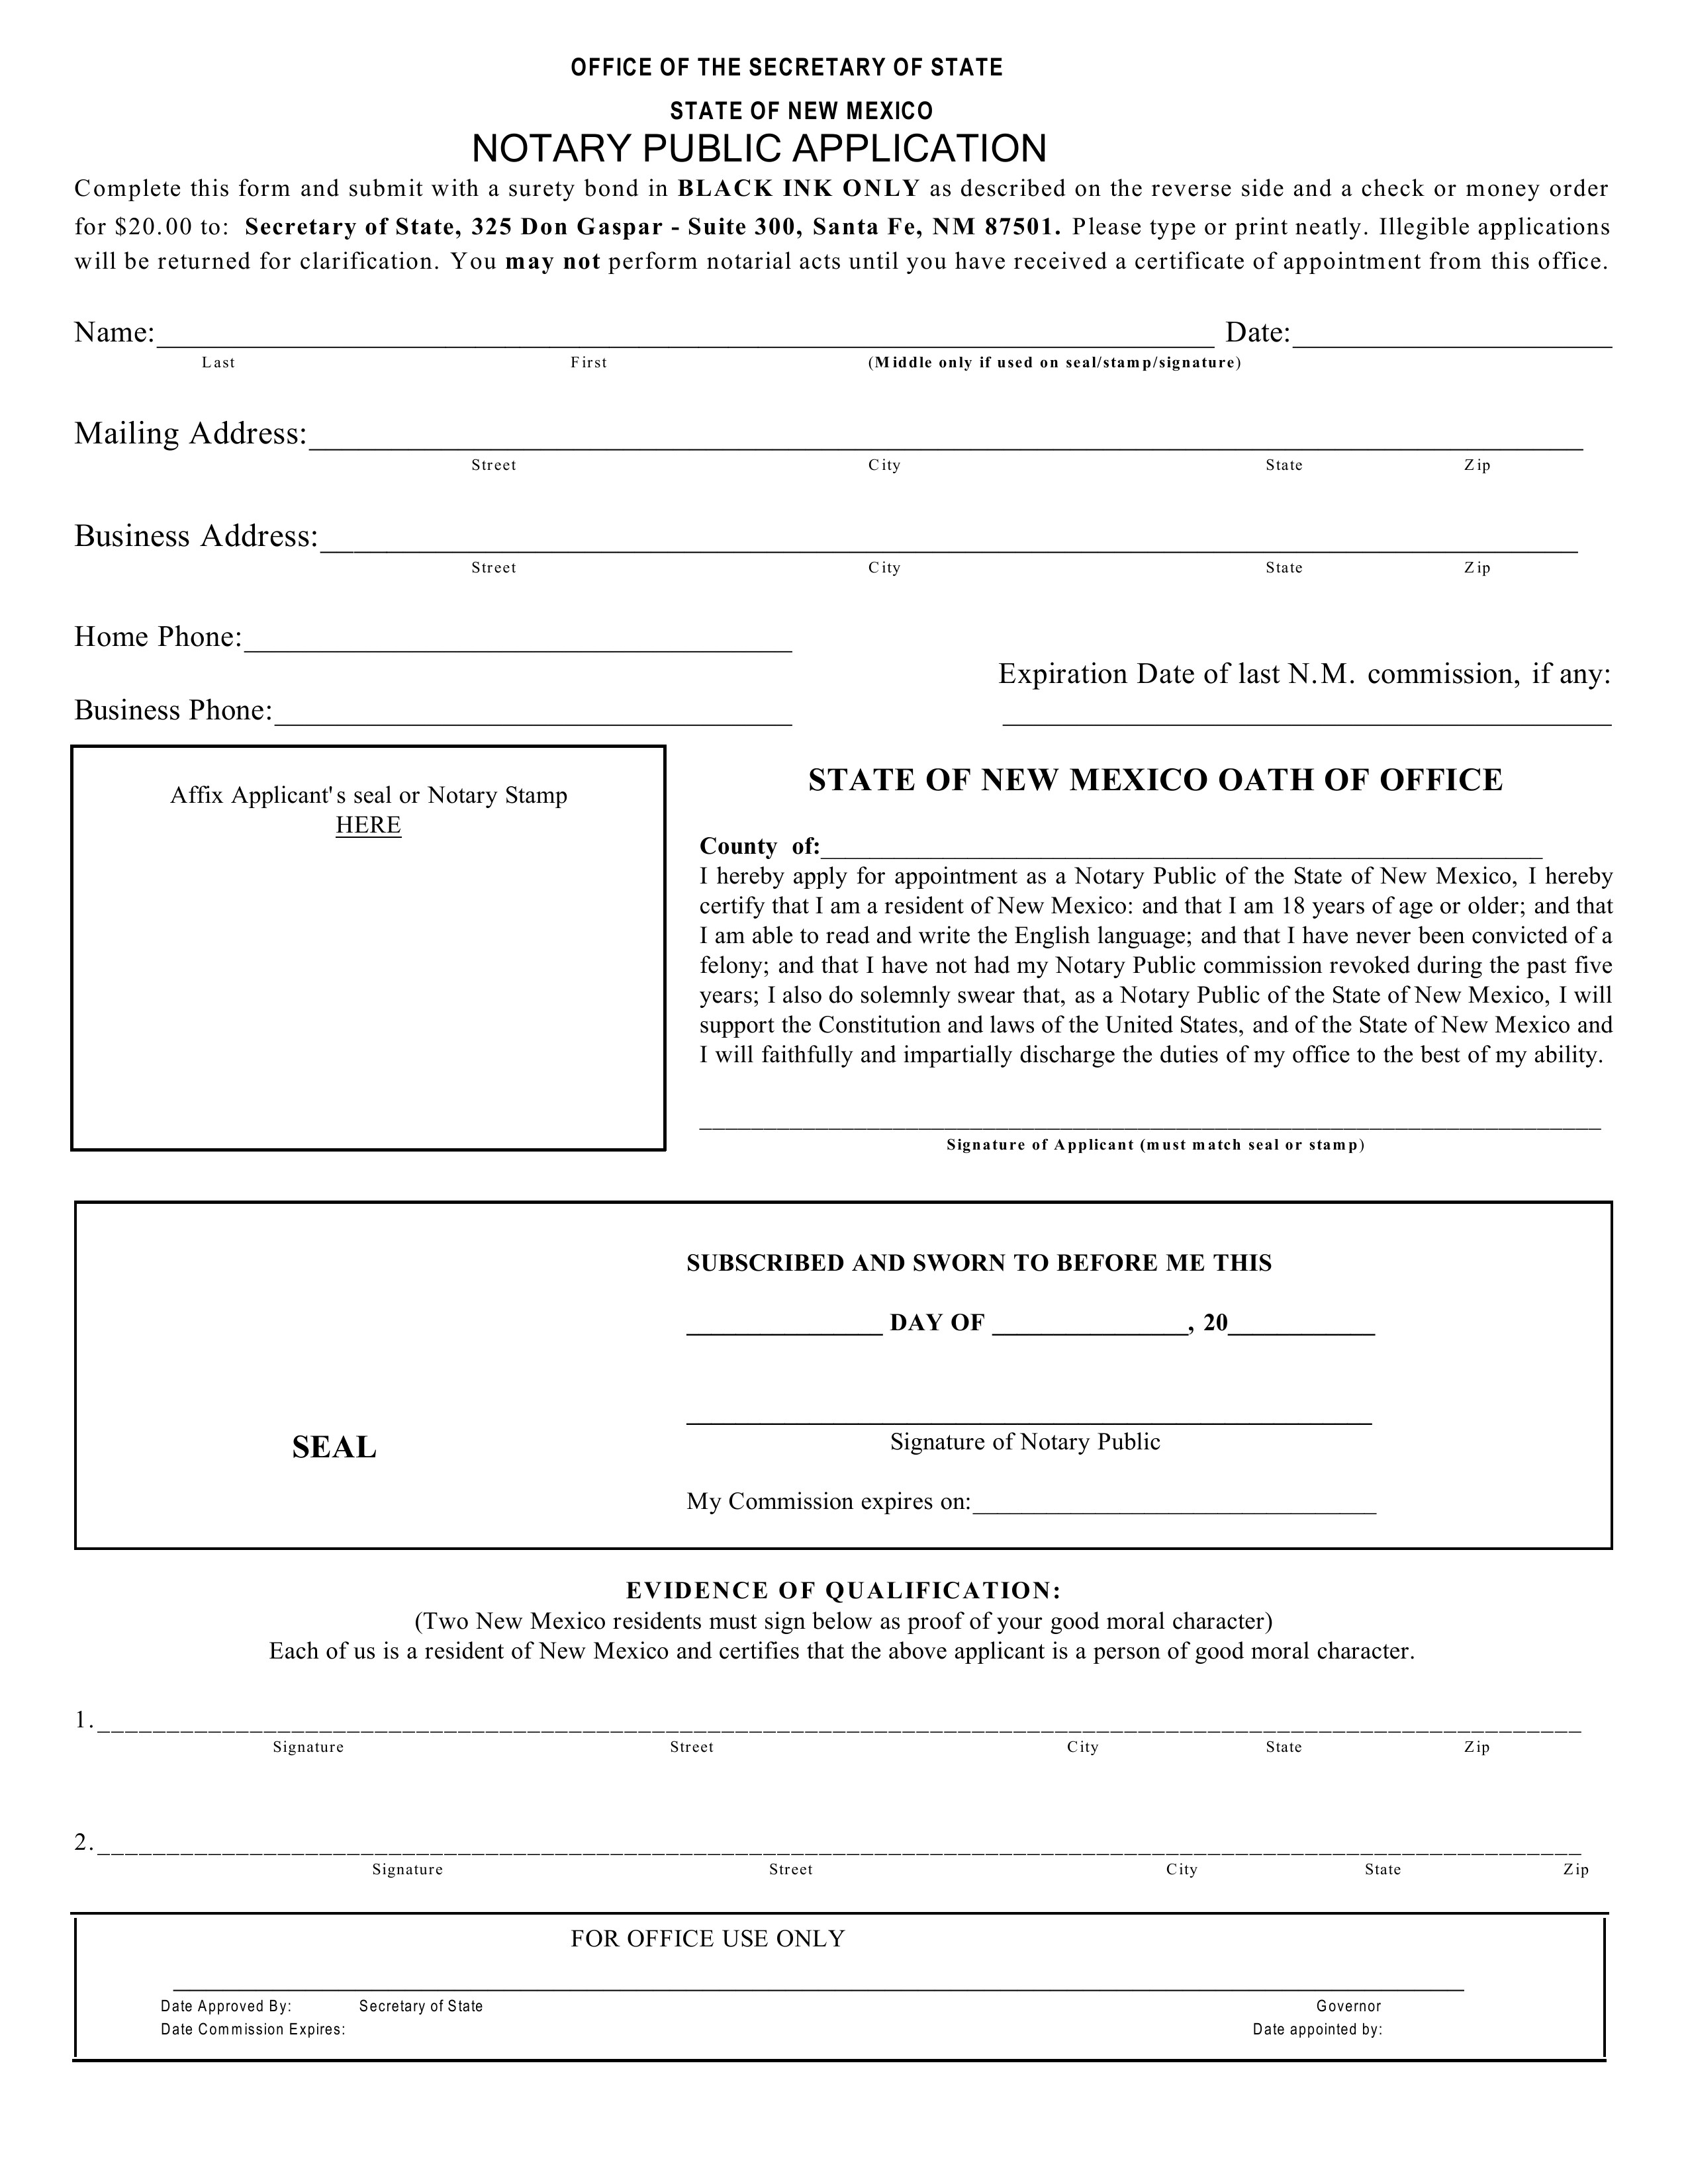 Notary Public Application Form New Mexico